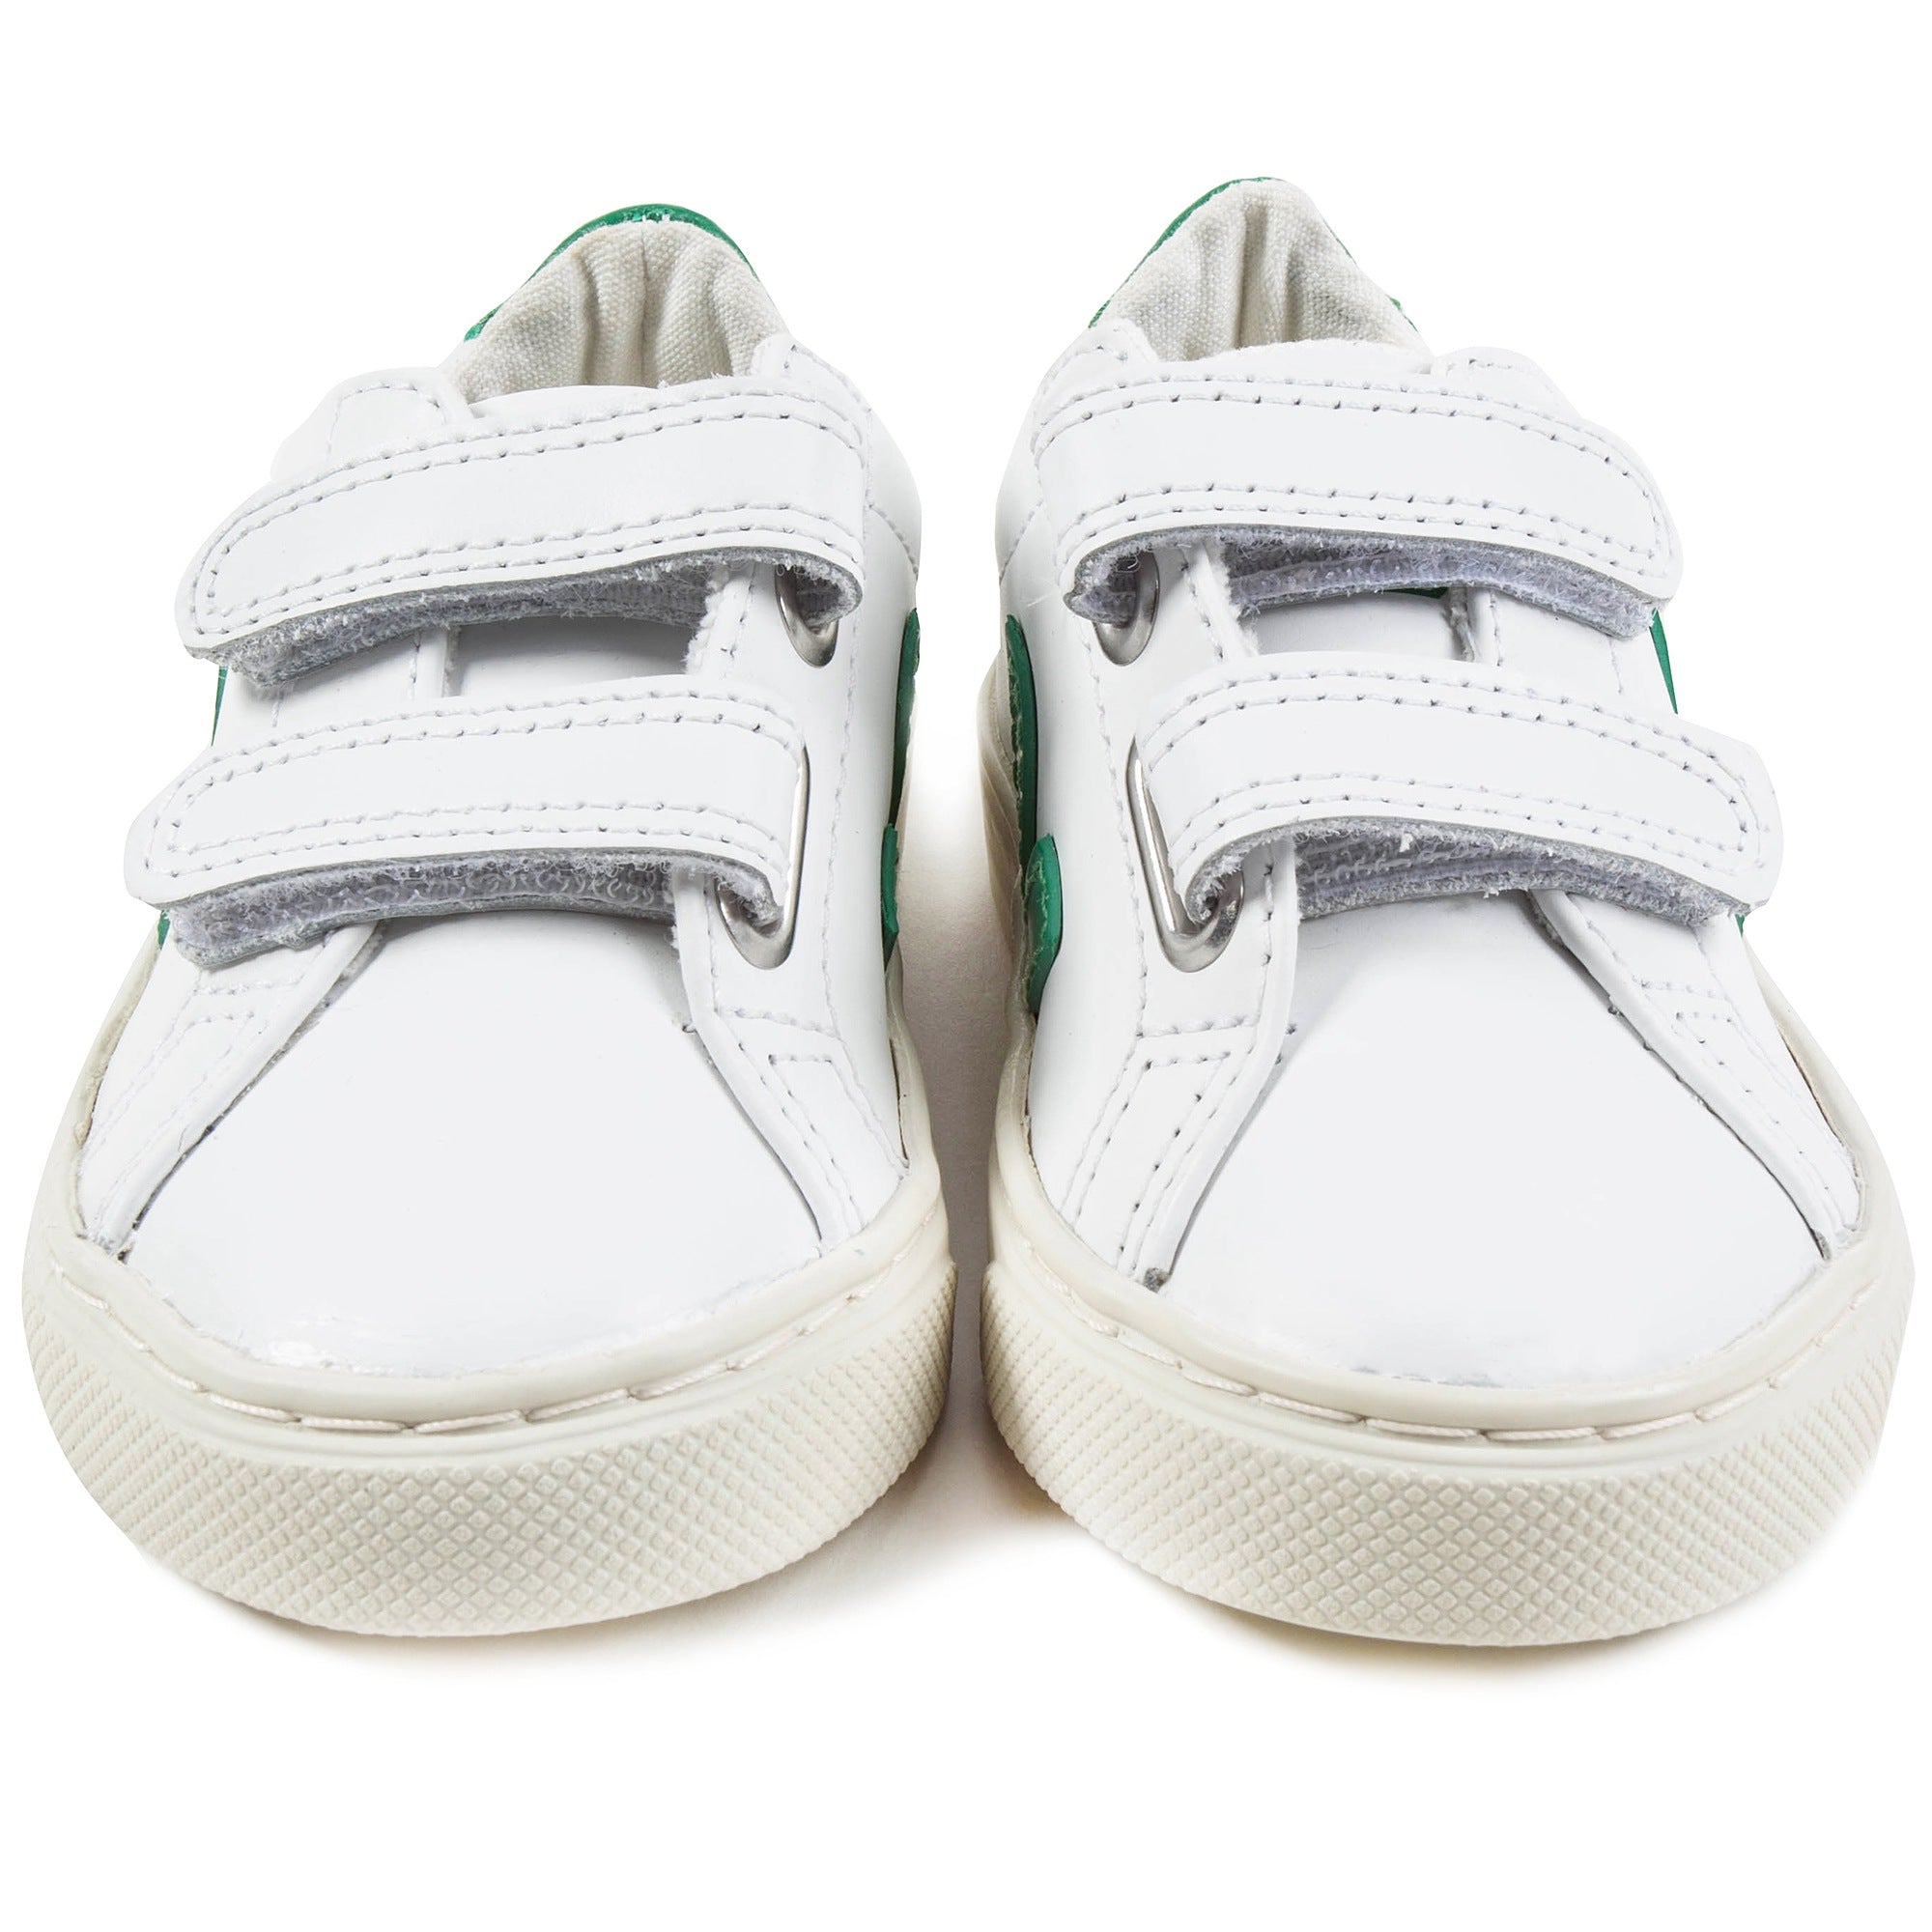 Baby  White   Leather Velcro   With  Green  "V" Shoes